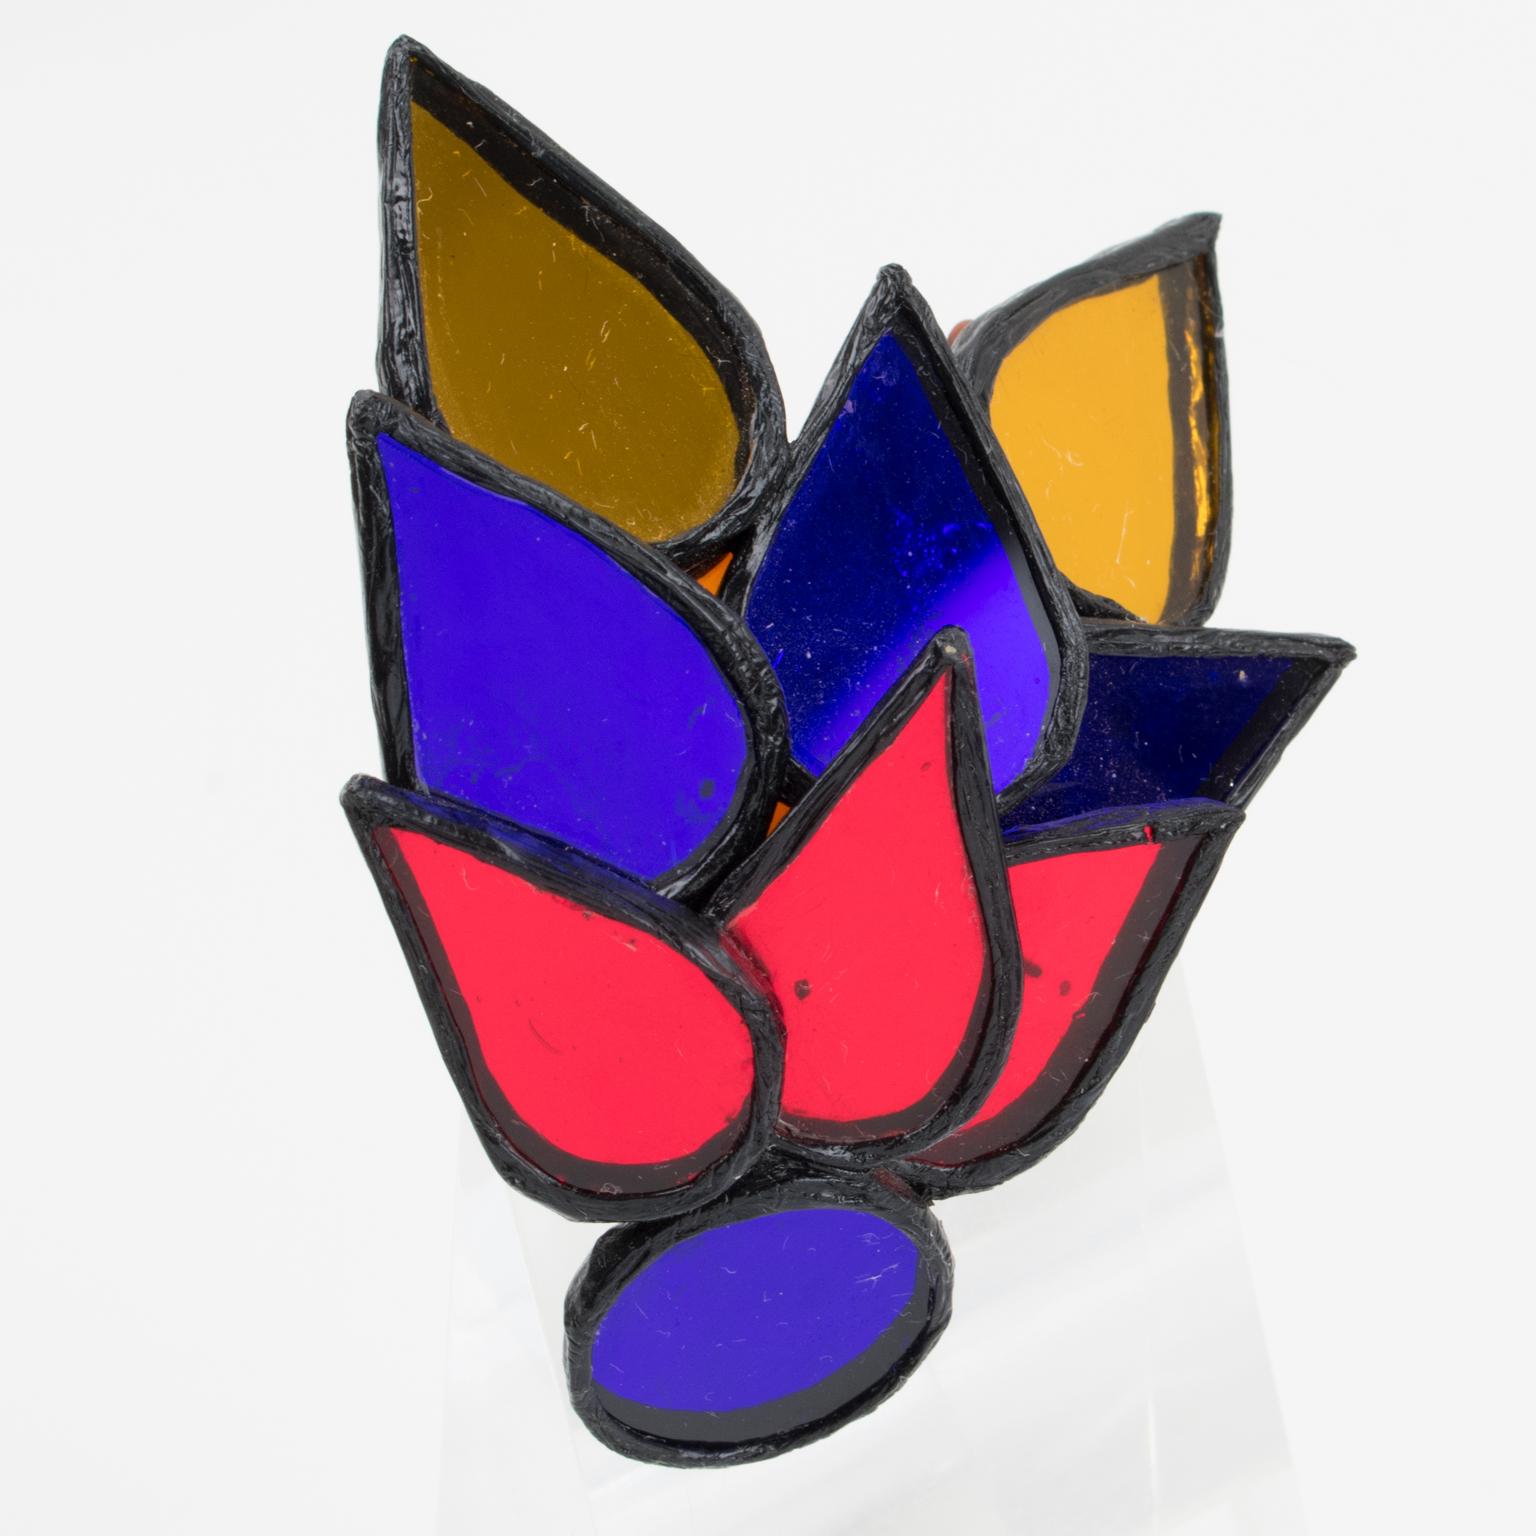 This is a marvelous Talosel or resin pin brooch designed by Irena Jaworska in the 1970s. The piece boasts a dimensional geometric bird shape in a black resin frame, topped with multicolored mirrors in ruby ​​red, cobalt blue, and saffron orange